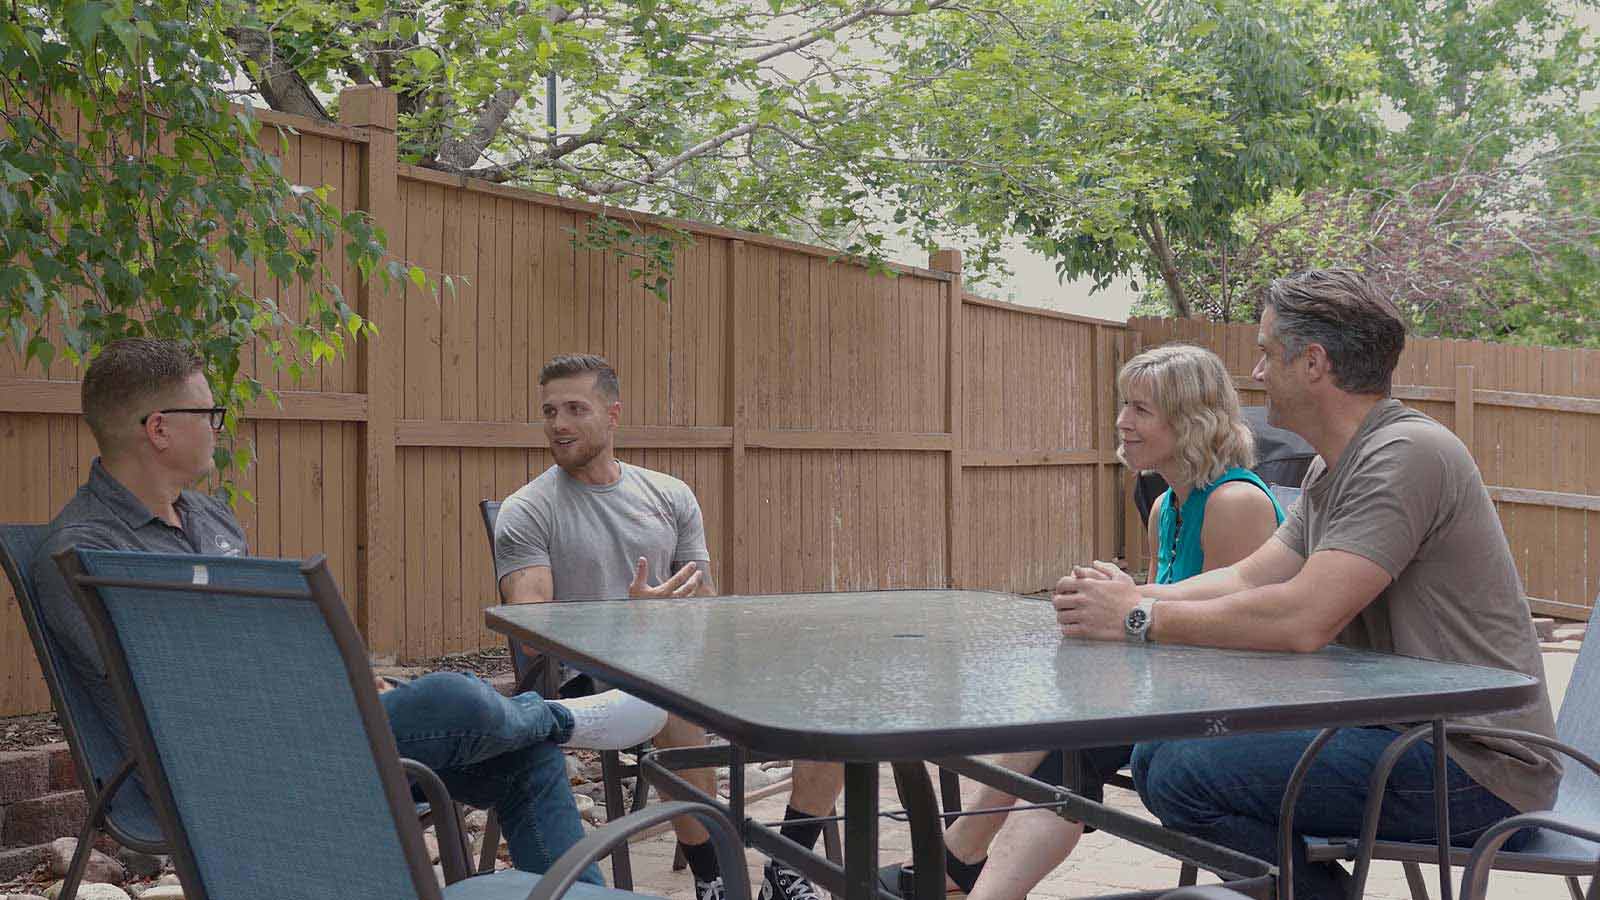 Four people engaging in conversation at an outdoor patio table.